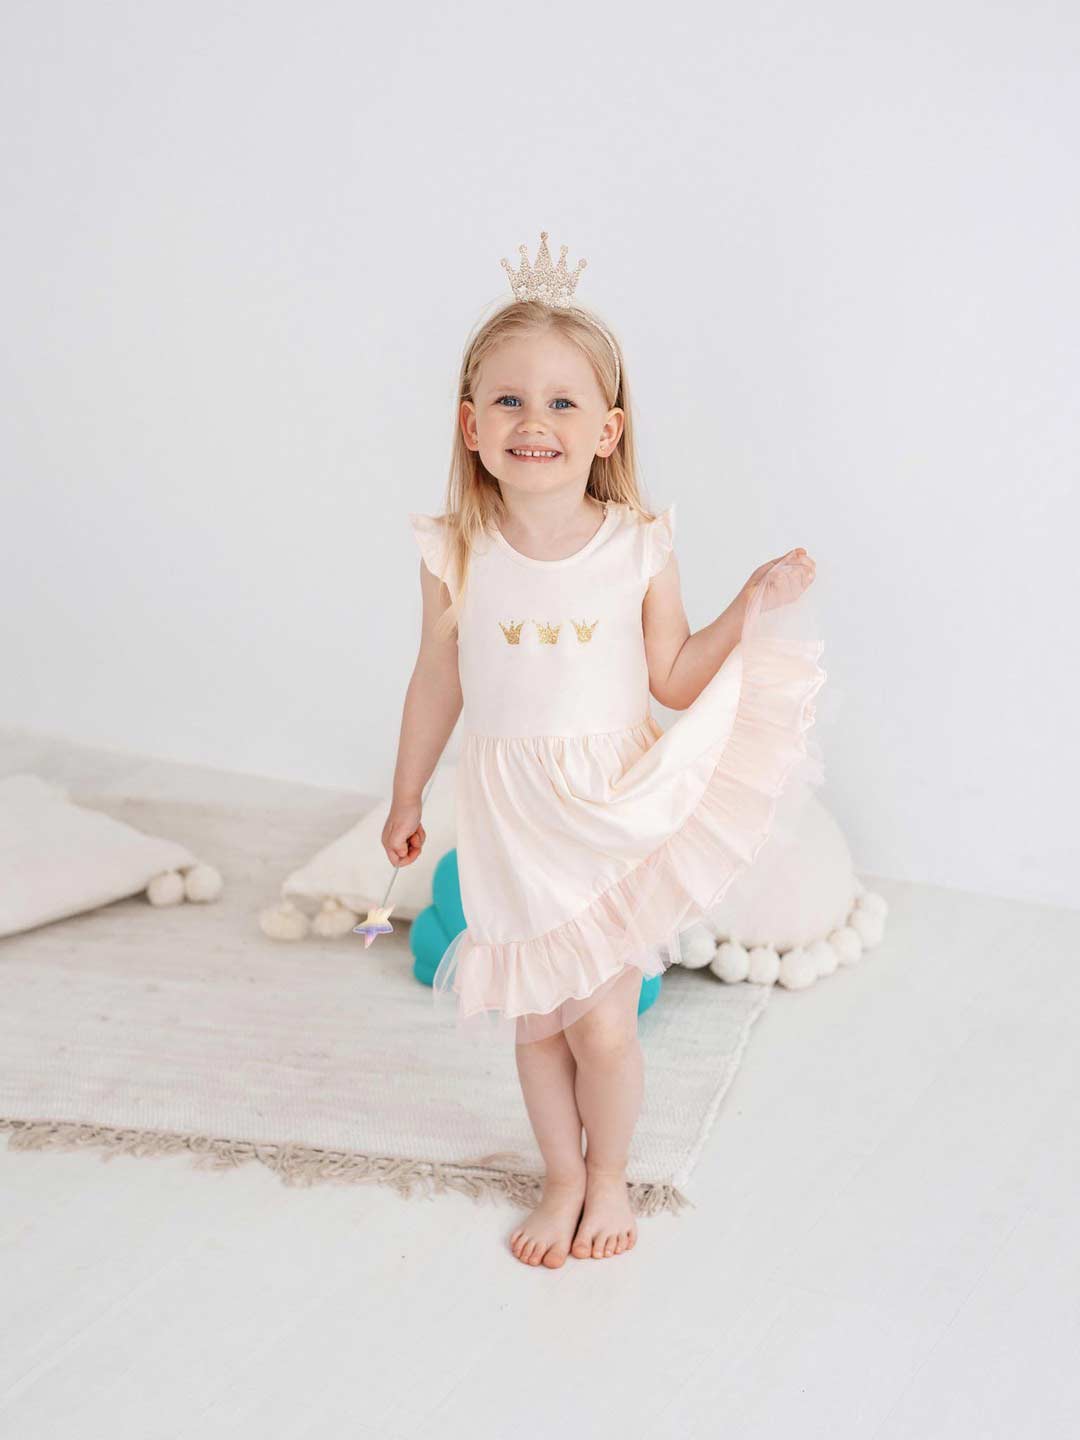 The Baby Dress Gold Fish 313 is a soft and comfy dress for fashionable little ladies.